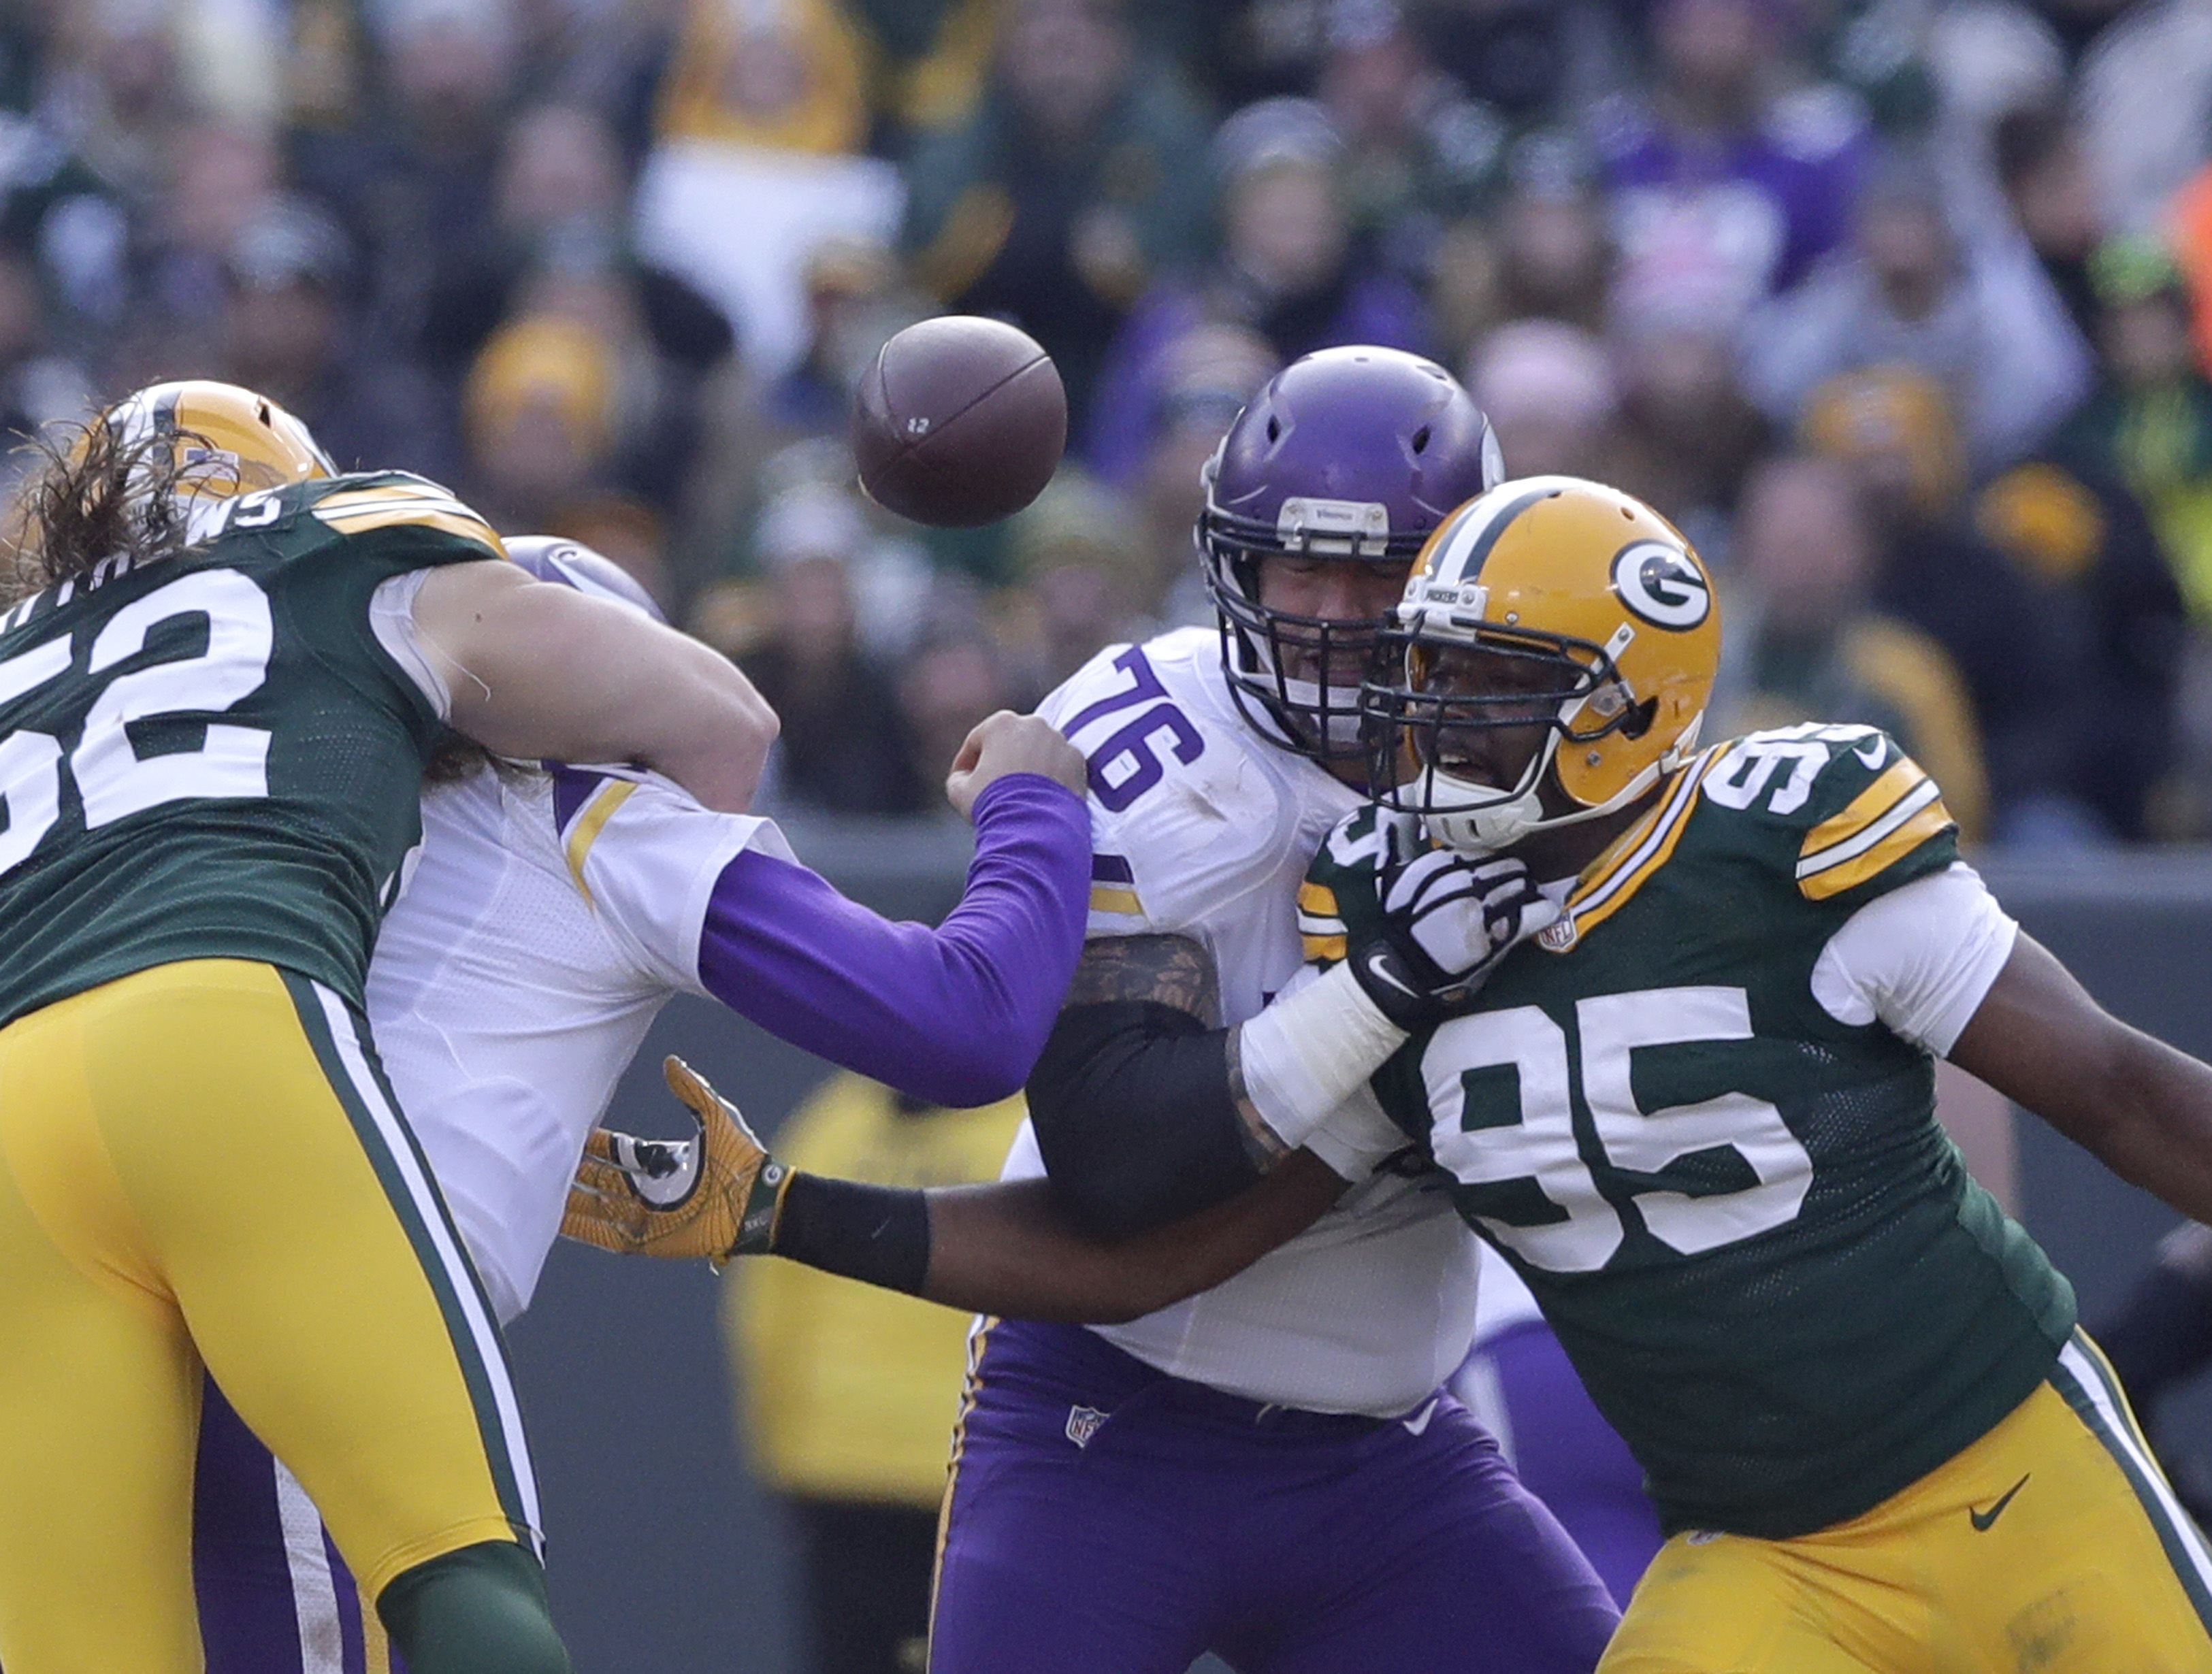 Clay Matthews is hoping for a full feature film after his hit